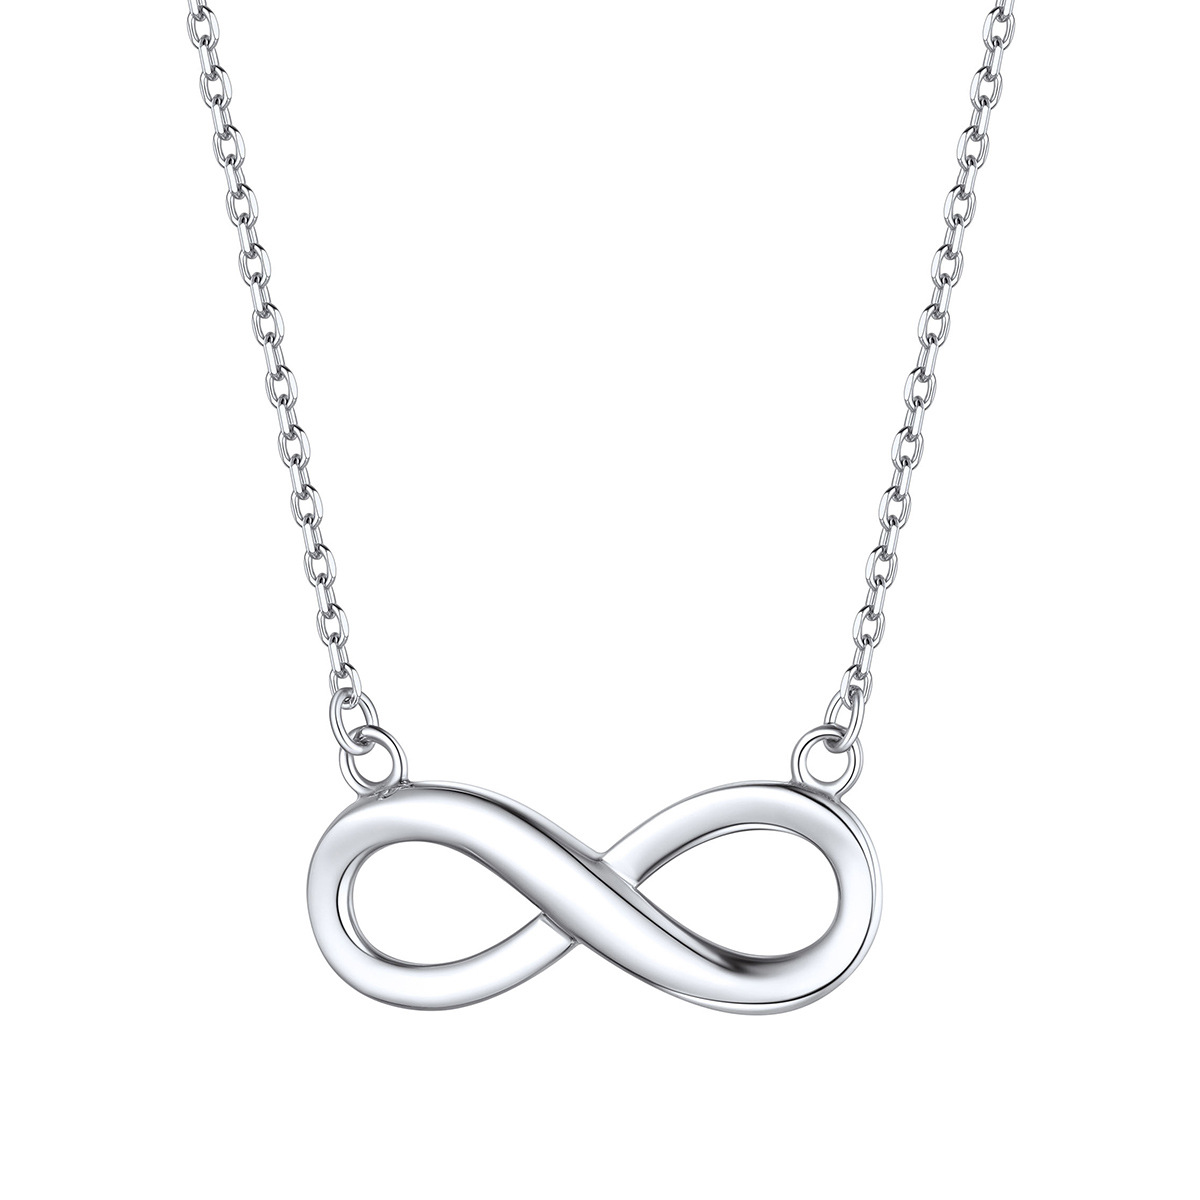 ChicSilver Sterling Silver Infinity Necklace Custom Engraved Necklace For Women 